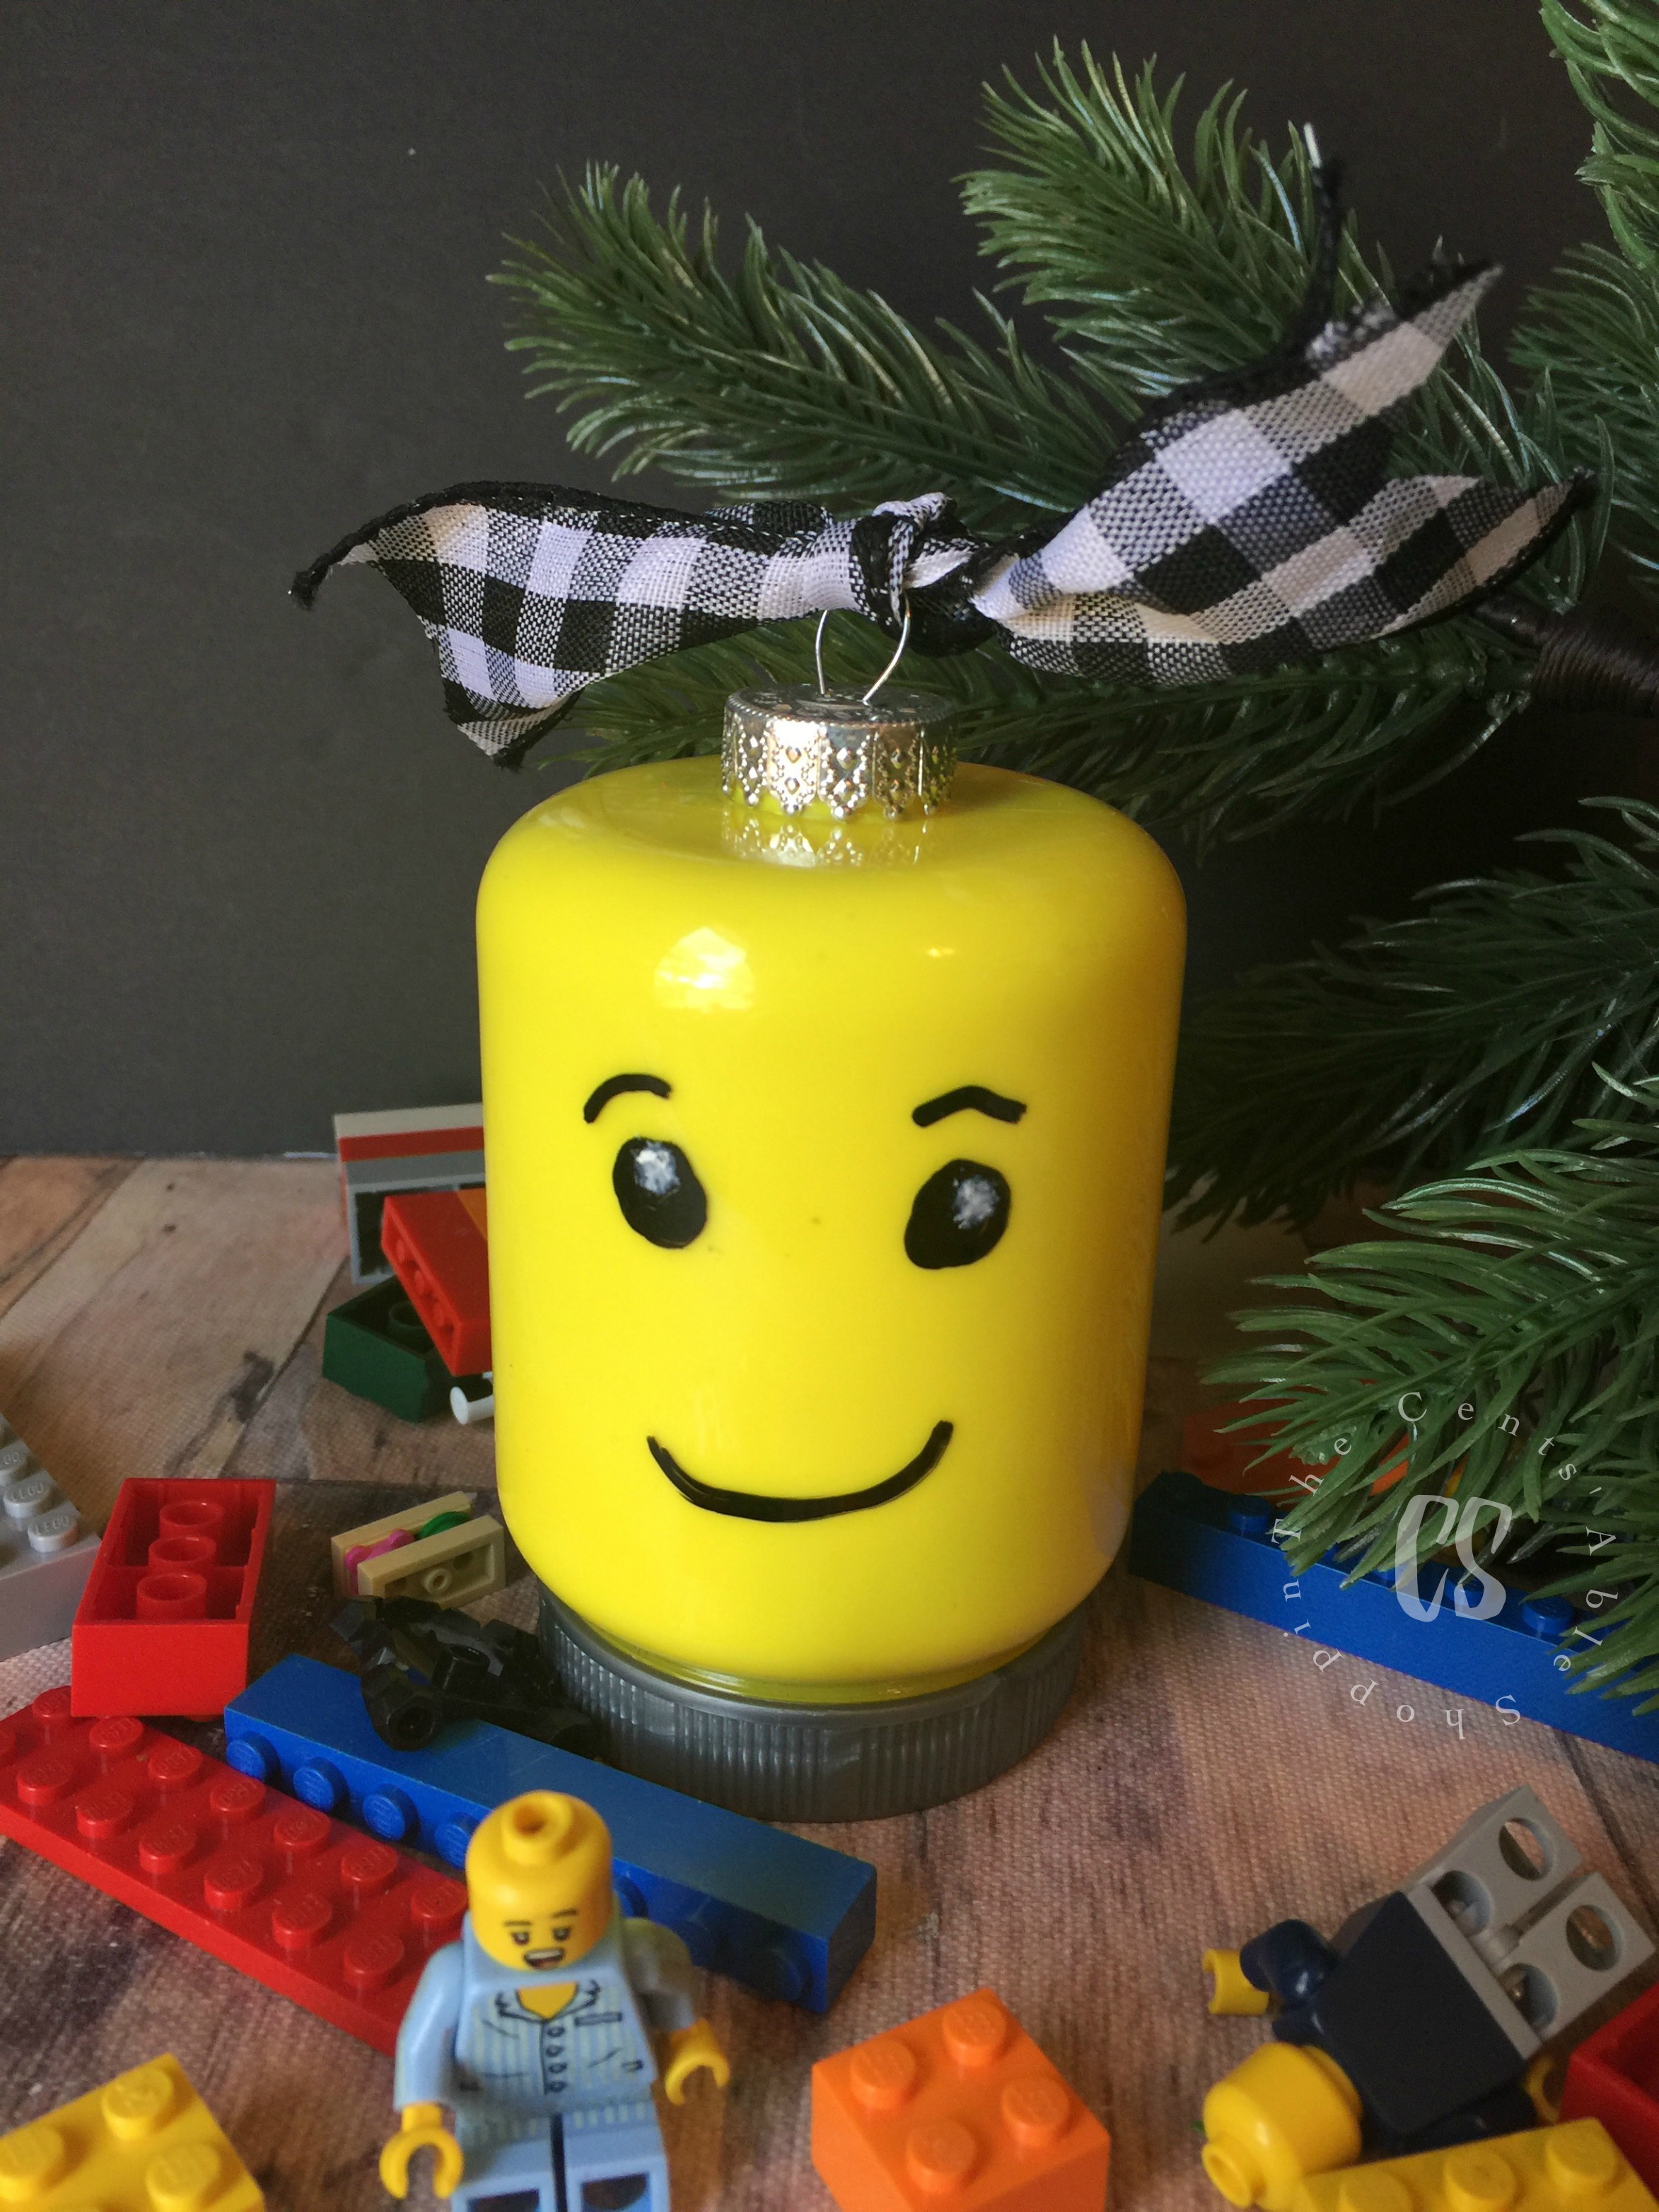 This simple LEGO Head Minifig Ornament is easy to make with simple items that would be a great project for a small family or as a larger group craft!